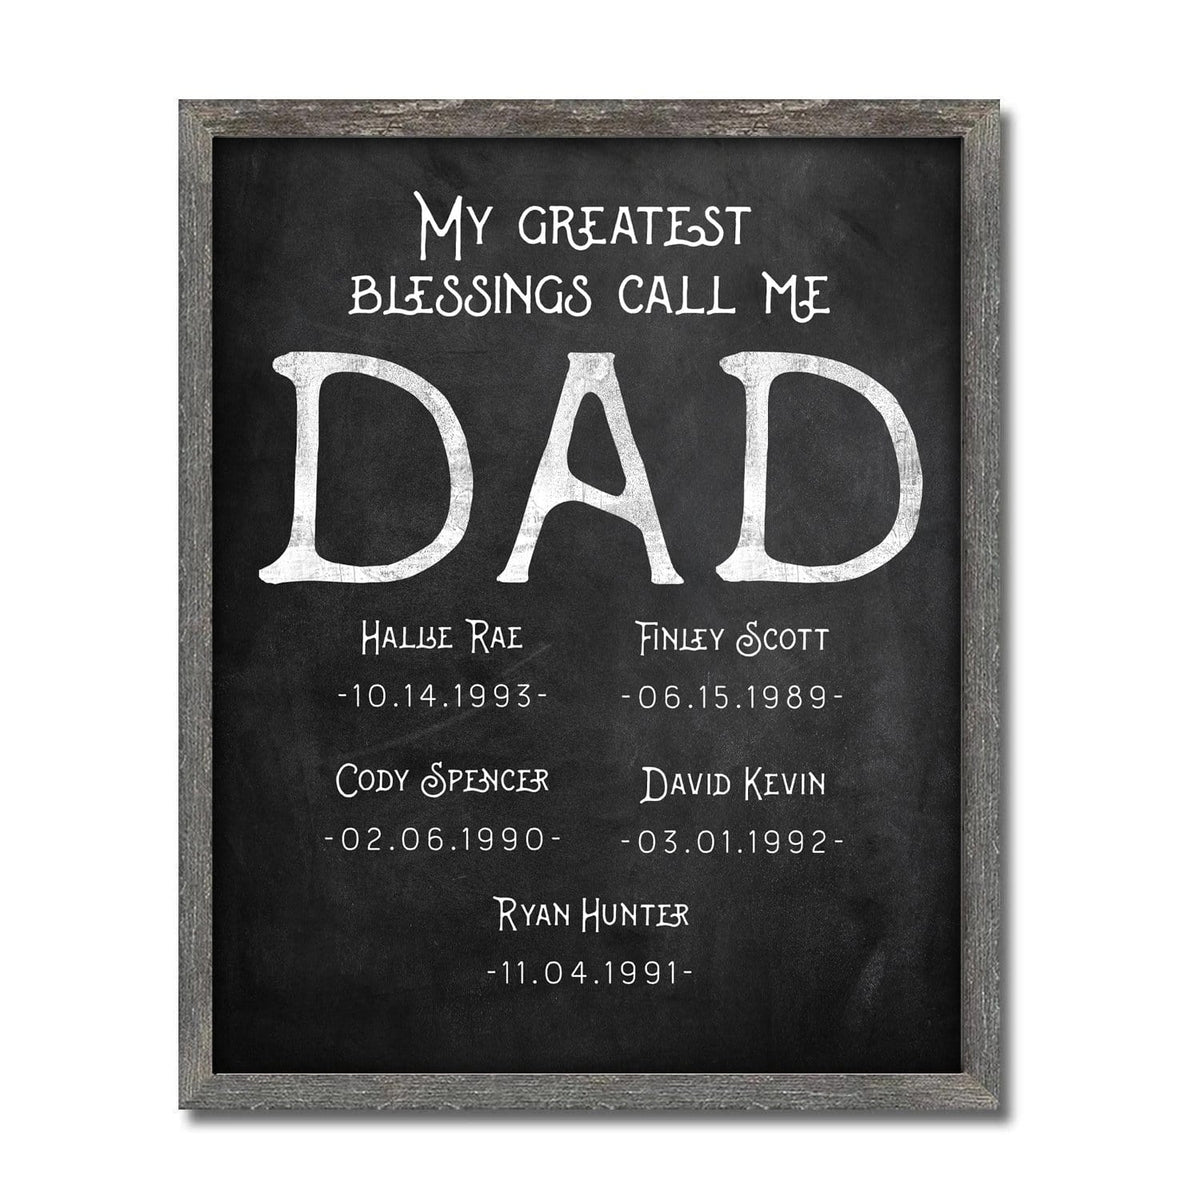 Personalized Art Gift for Dad - Framed Canvas